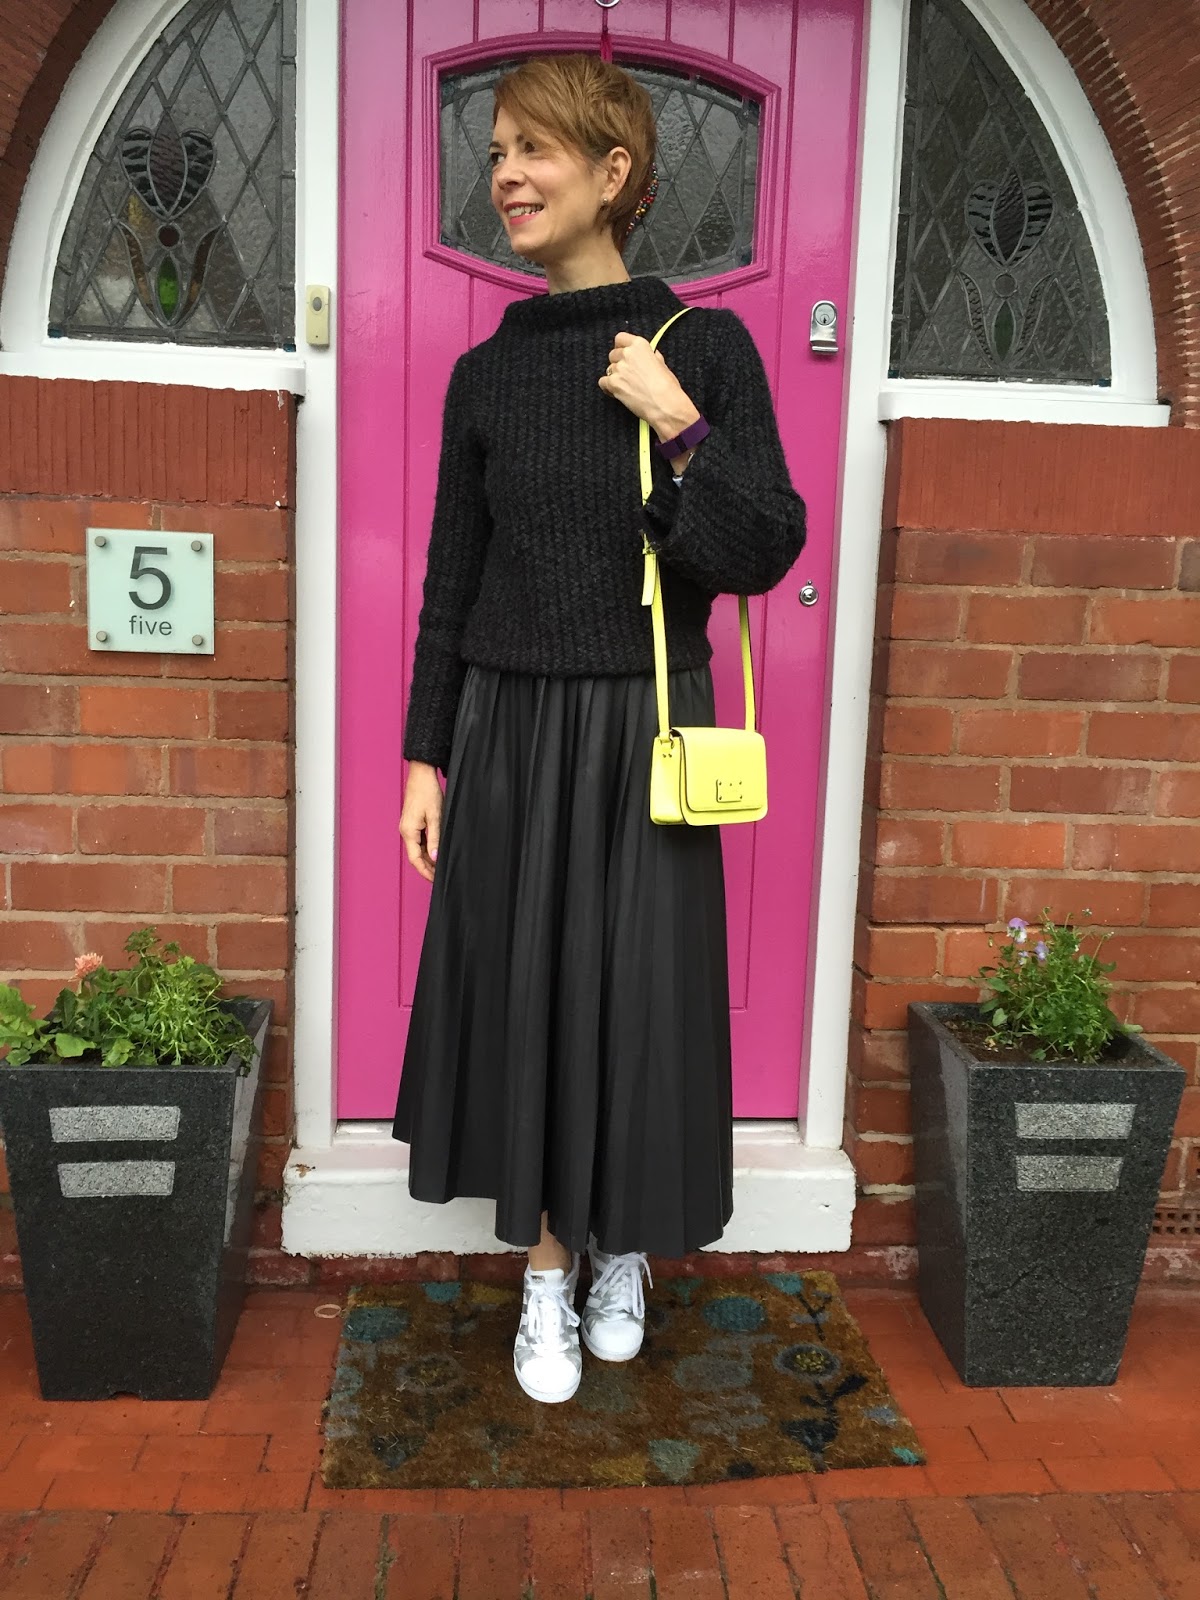 Pleated skirts – another one to ponder and how to style them….